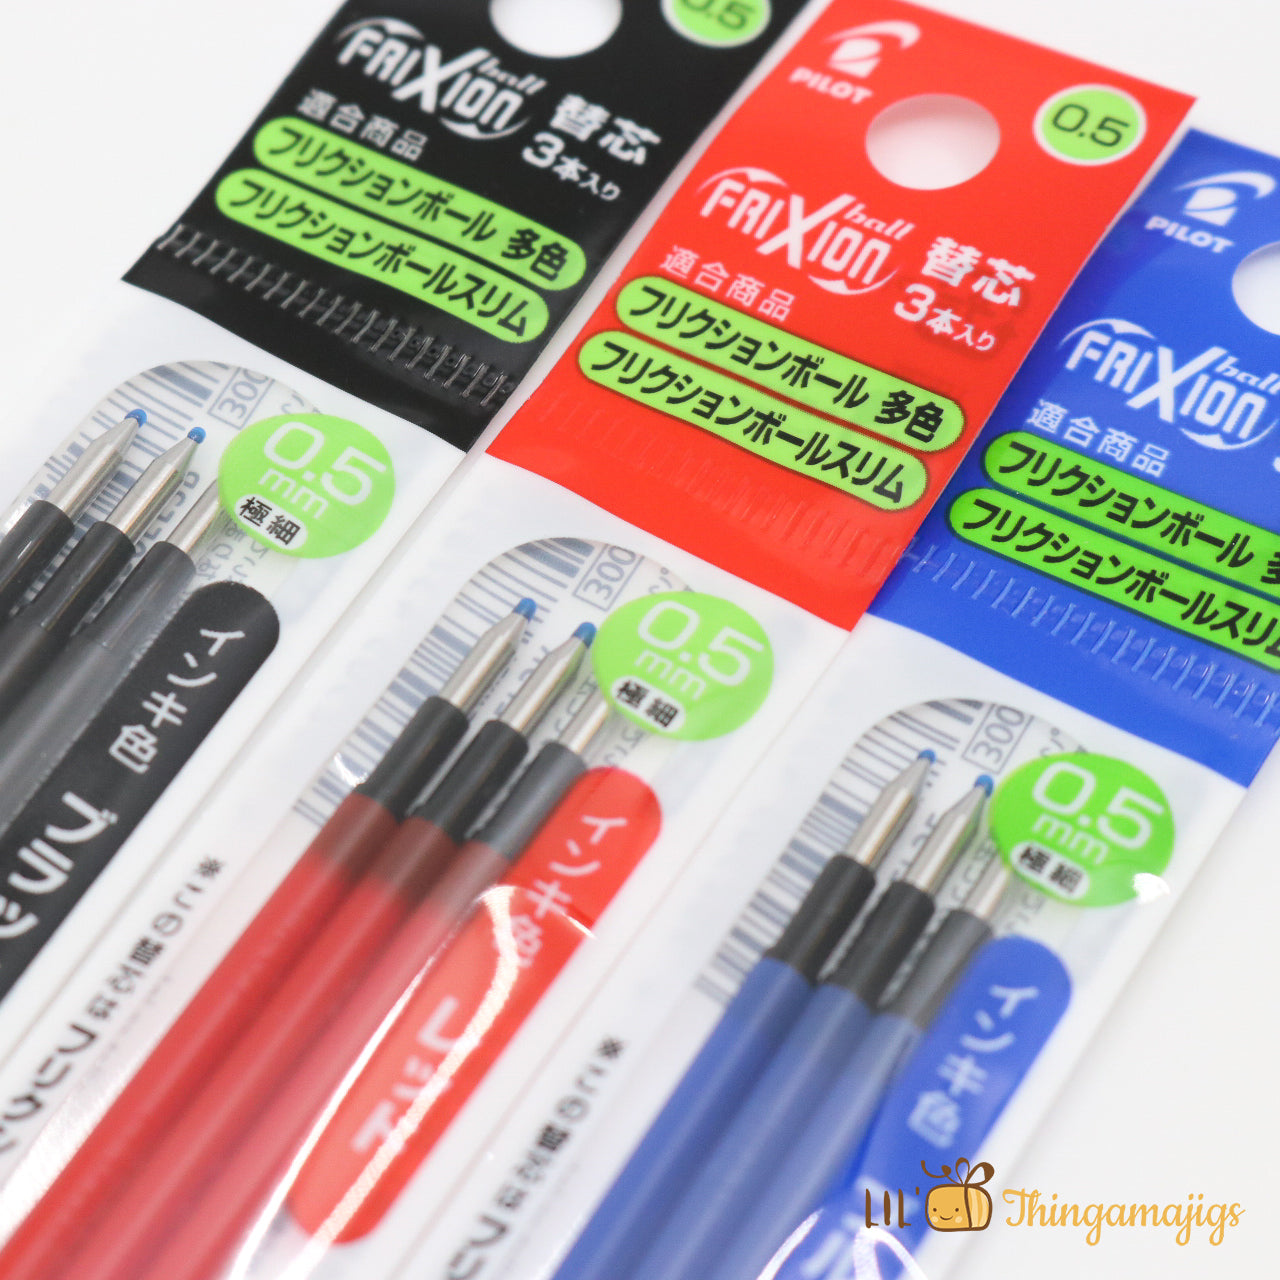 Pilot Frixion Erasable Gel Pen Refill - 0.38mm for single and multi frixion pen (3pcs included)